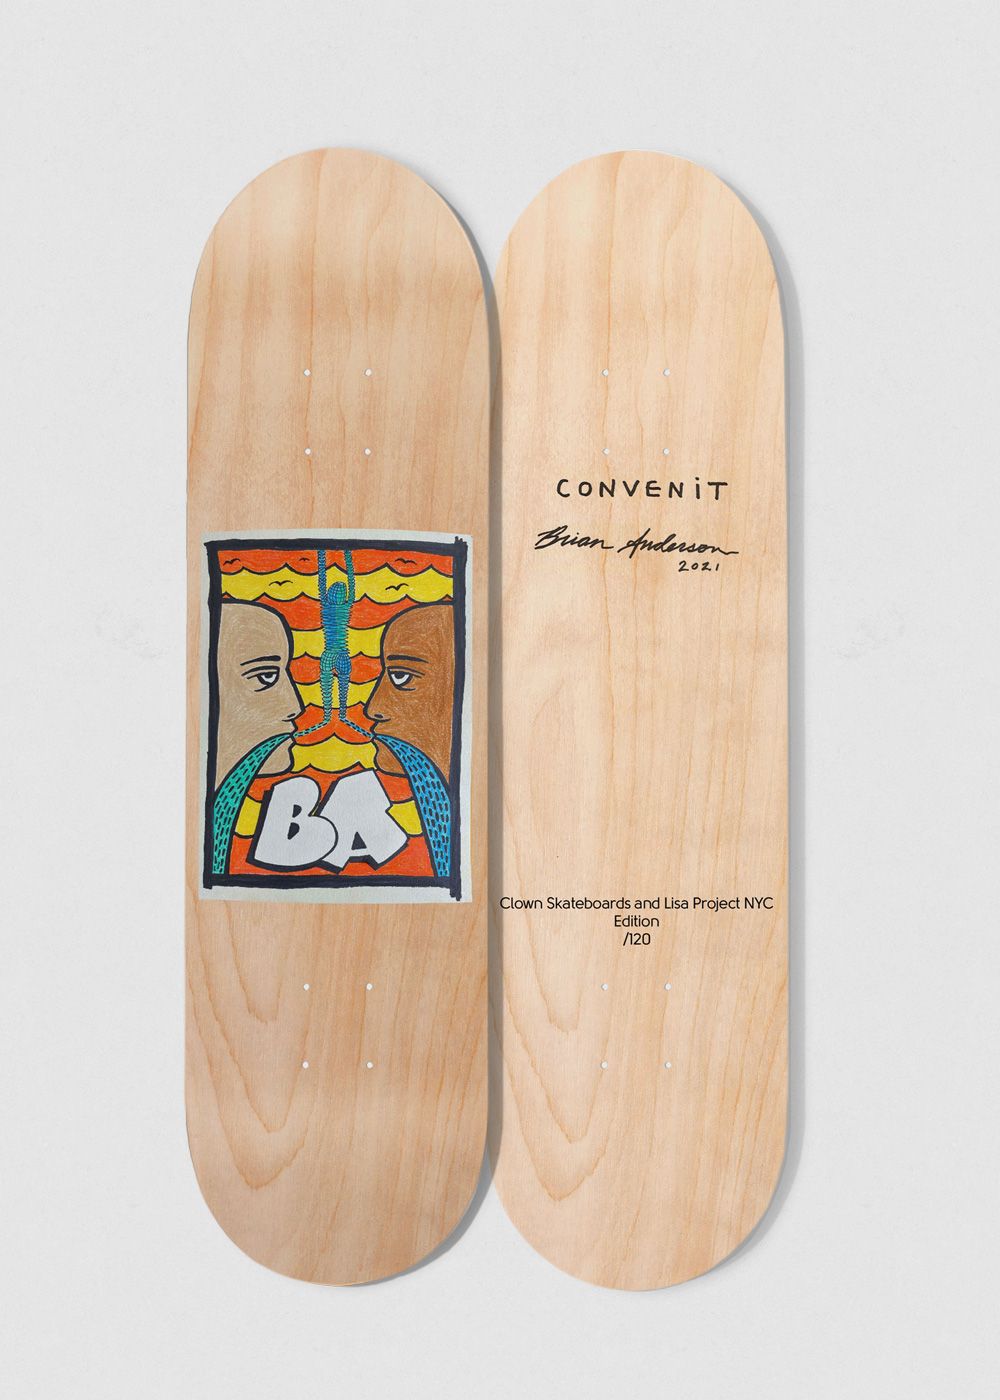 Convenit Skateboard By Brian Anderson For Clown Skateboards And Lisa Project NYC 3